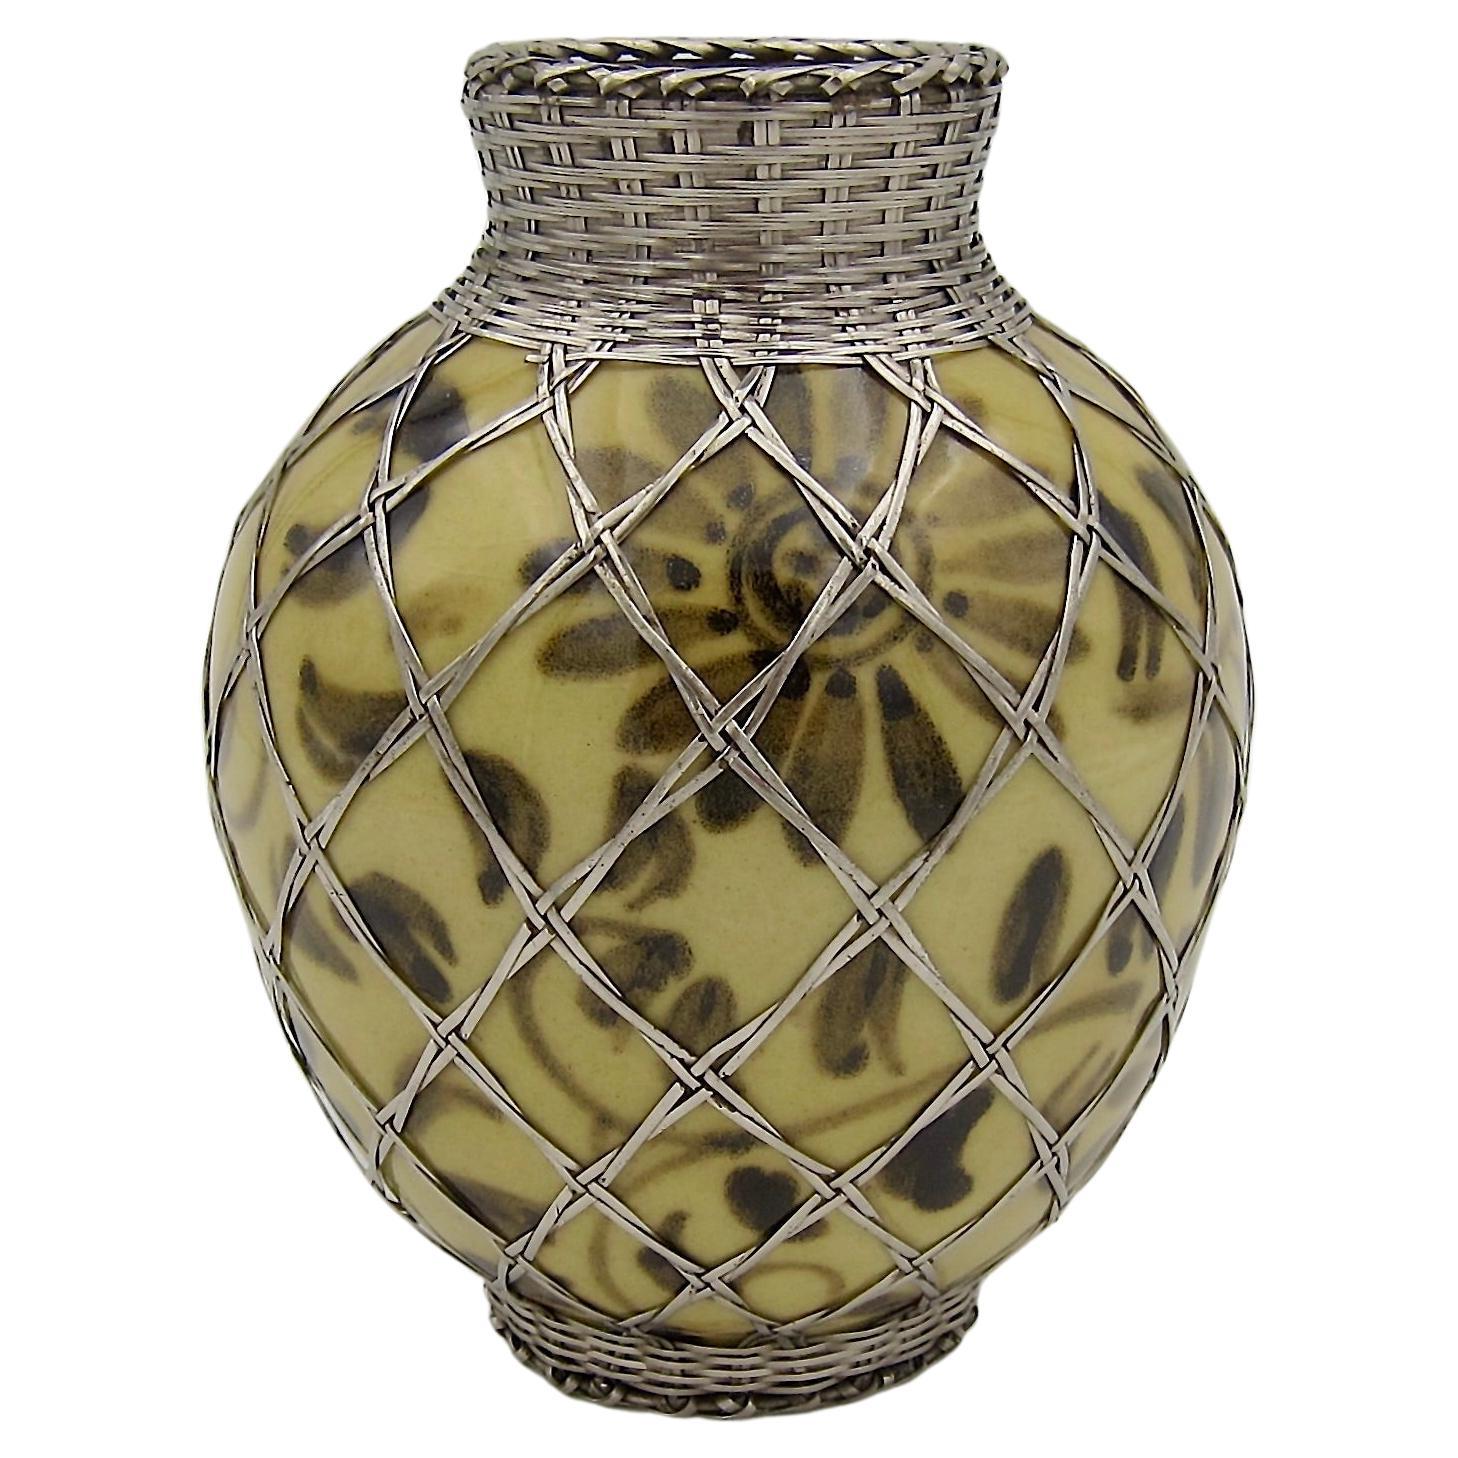 Antique Hand-Painted Art Pottery Vase With Silver Basket Weave Overlay